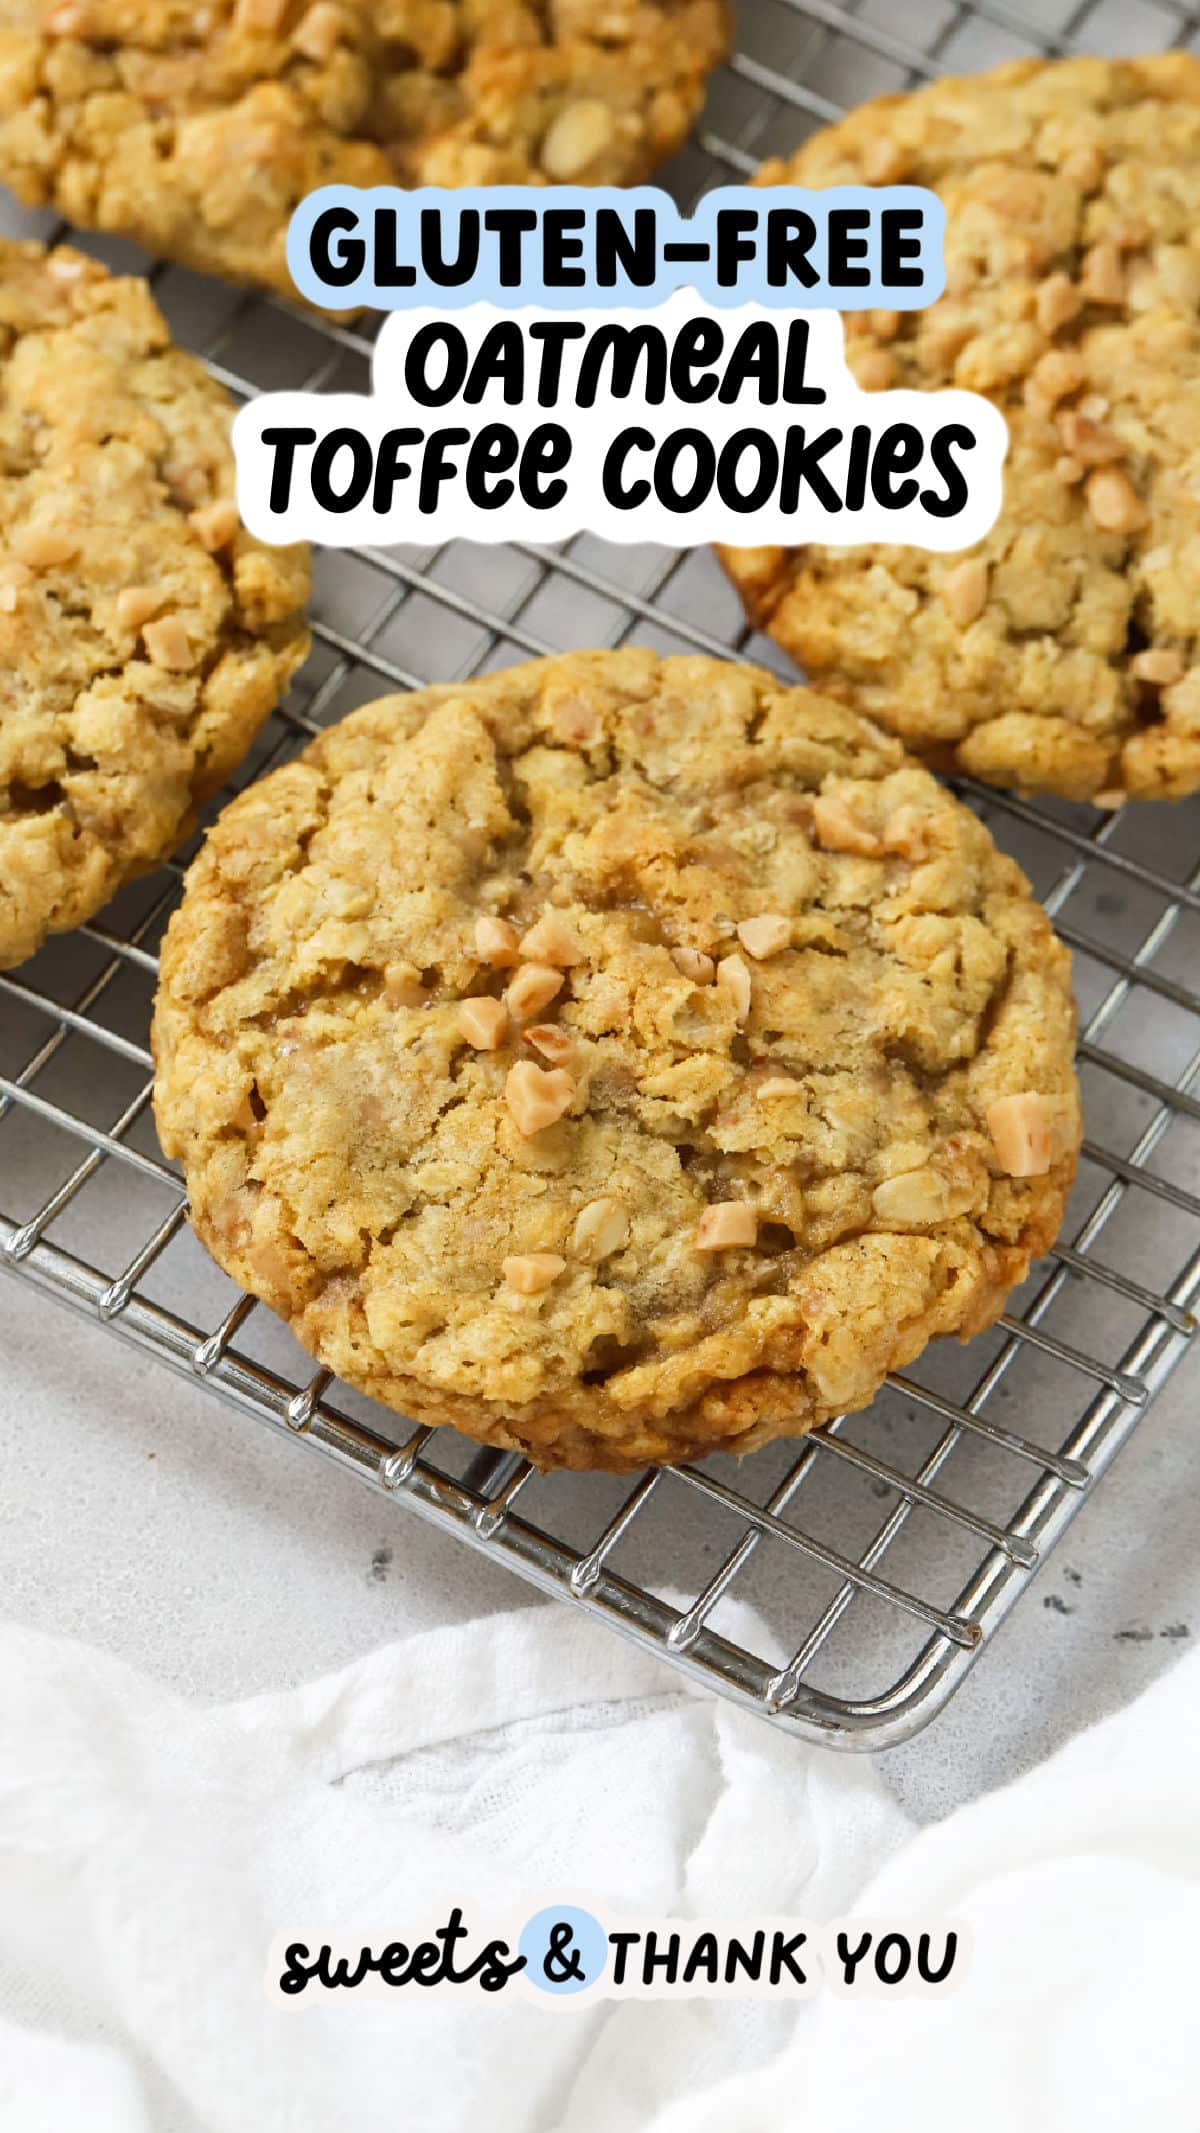 Our Gluten-Free Oatmeal Toffee Cookies combine a soft, chewy oatmeal cookie base with crunchy toffee bits for a yummy bakery-style cookie recipe you'll LOVE! They're a delicious take on classic oatmeal cookies and so easy to make, thanks to simple ingredients. Get the recipe for these gluten-free toffee oatmeal cookies (and a few variations to try!) at sweetsandthankyou.com